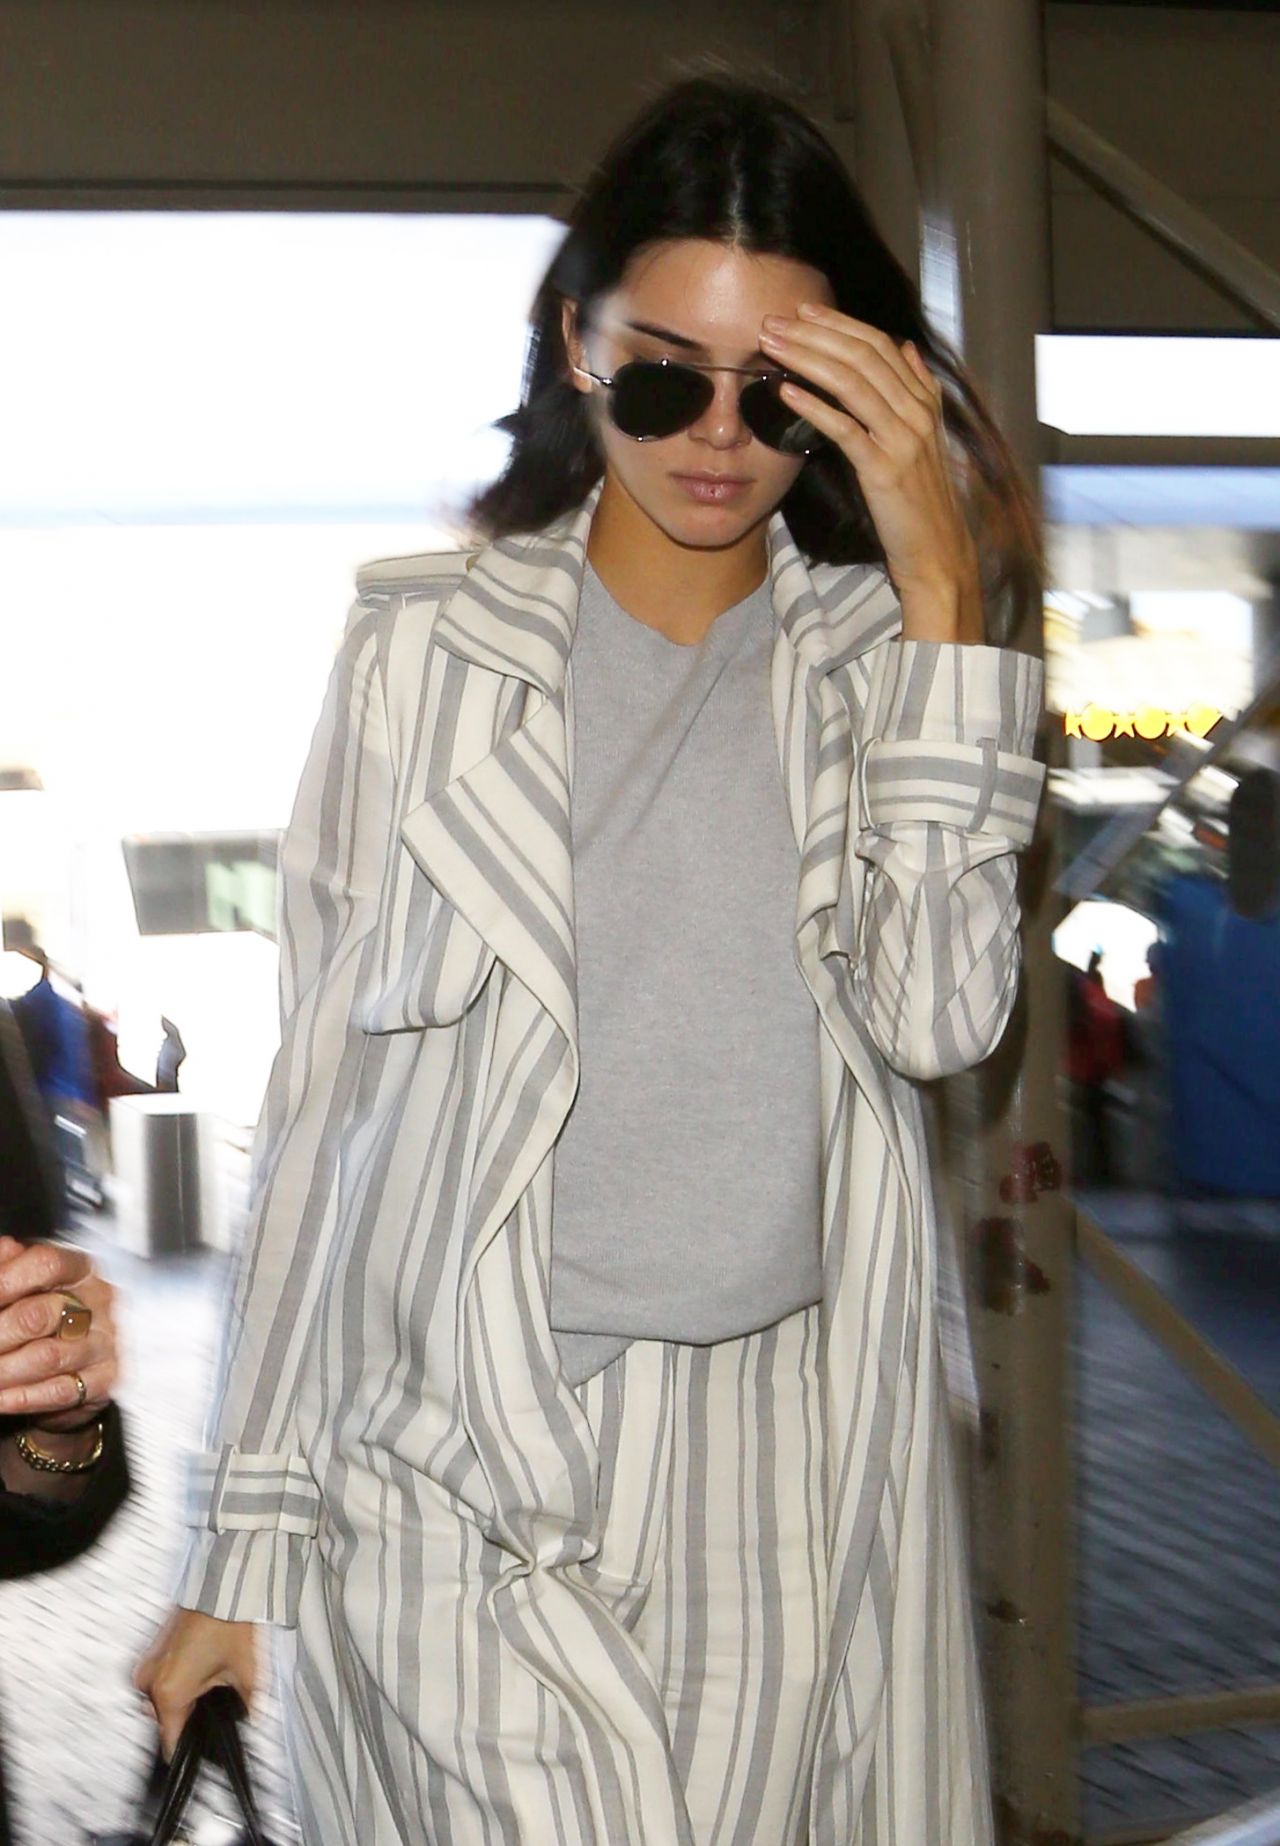 Kendall Jenner LAX Airport June 16, 2014 – Star Style